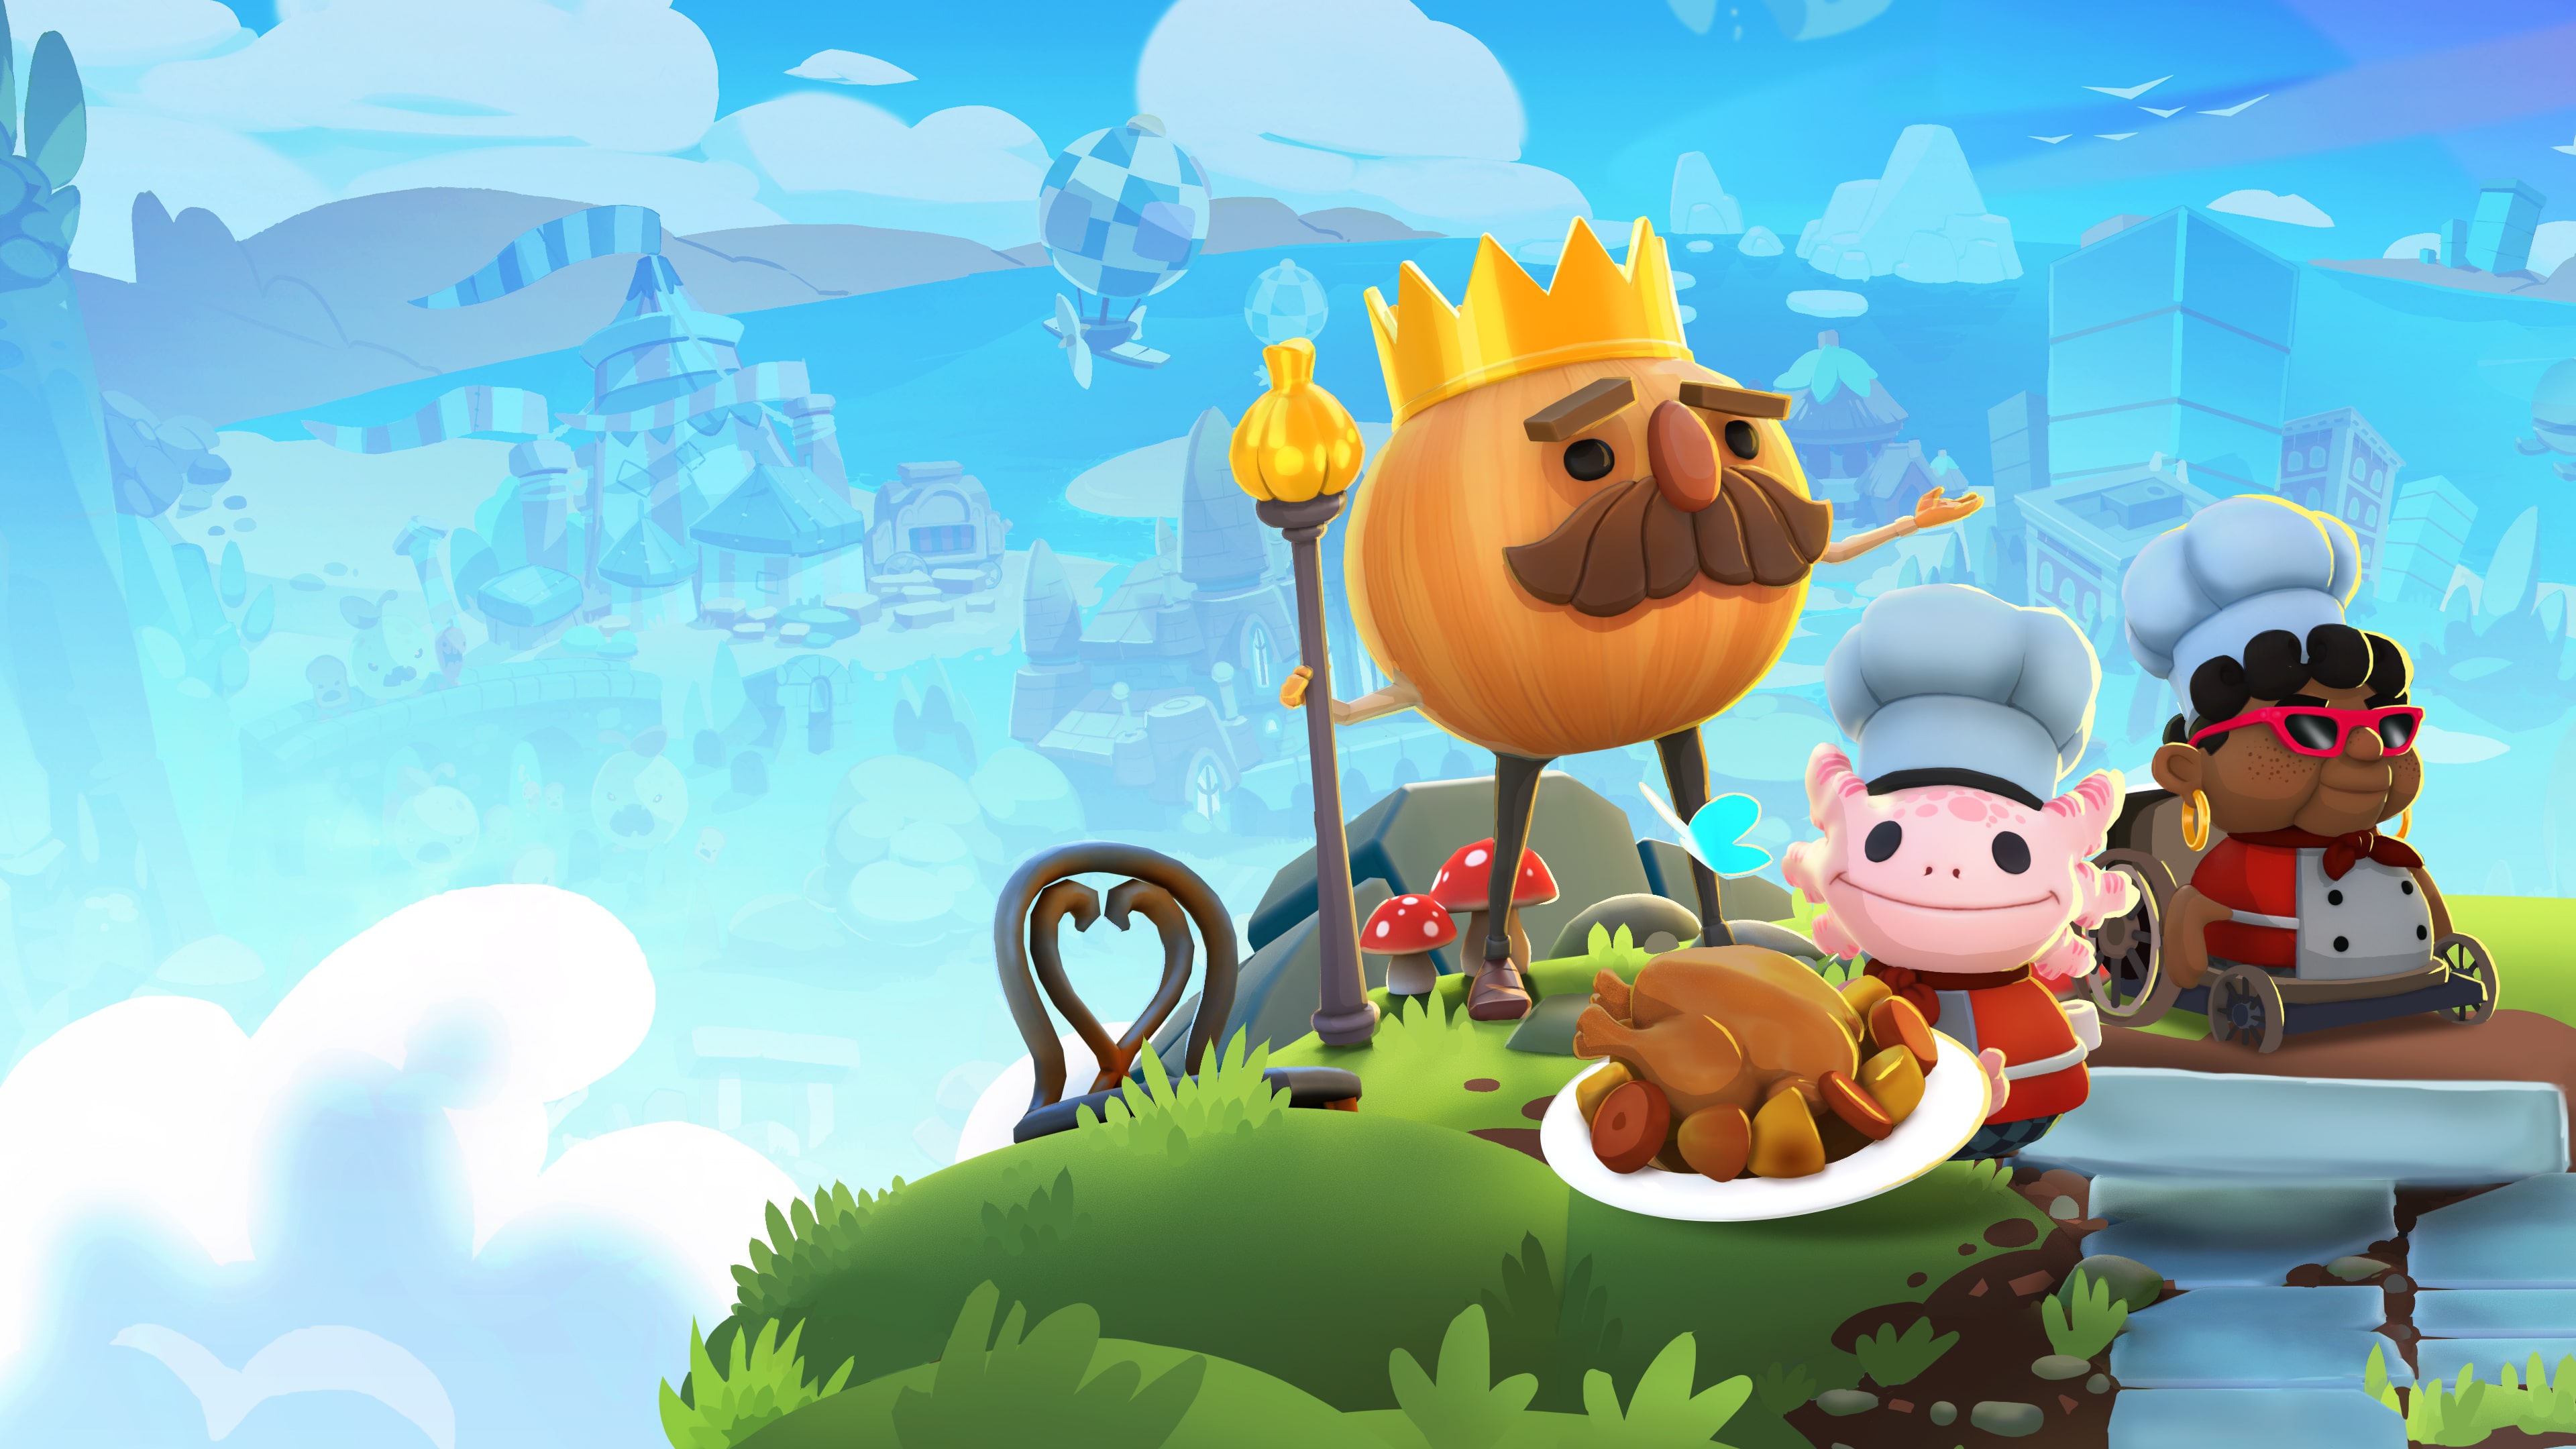 Overcooked! All You Can Eat (Simplified Chinese, English, Korean, Thai, Japanese, Traditional Chinese)